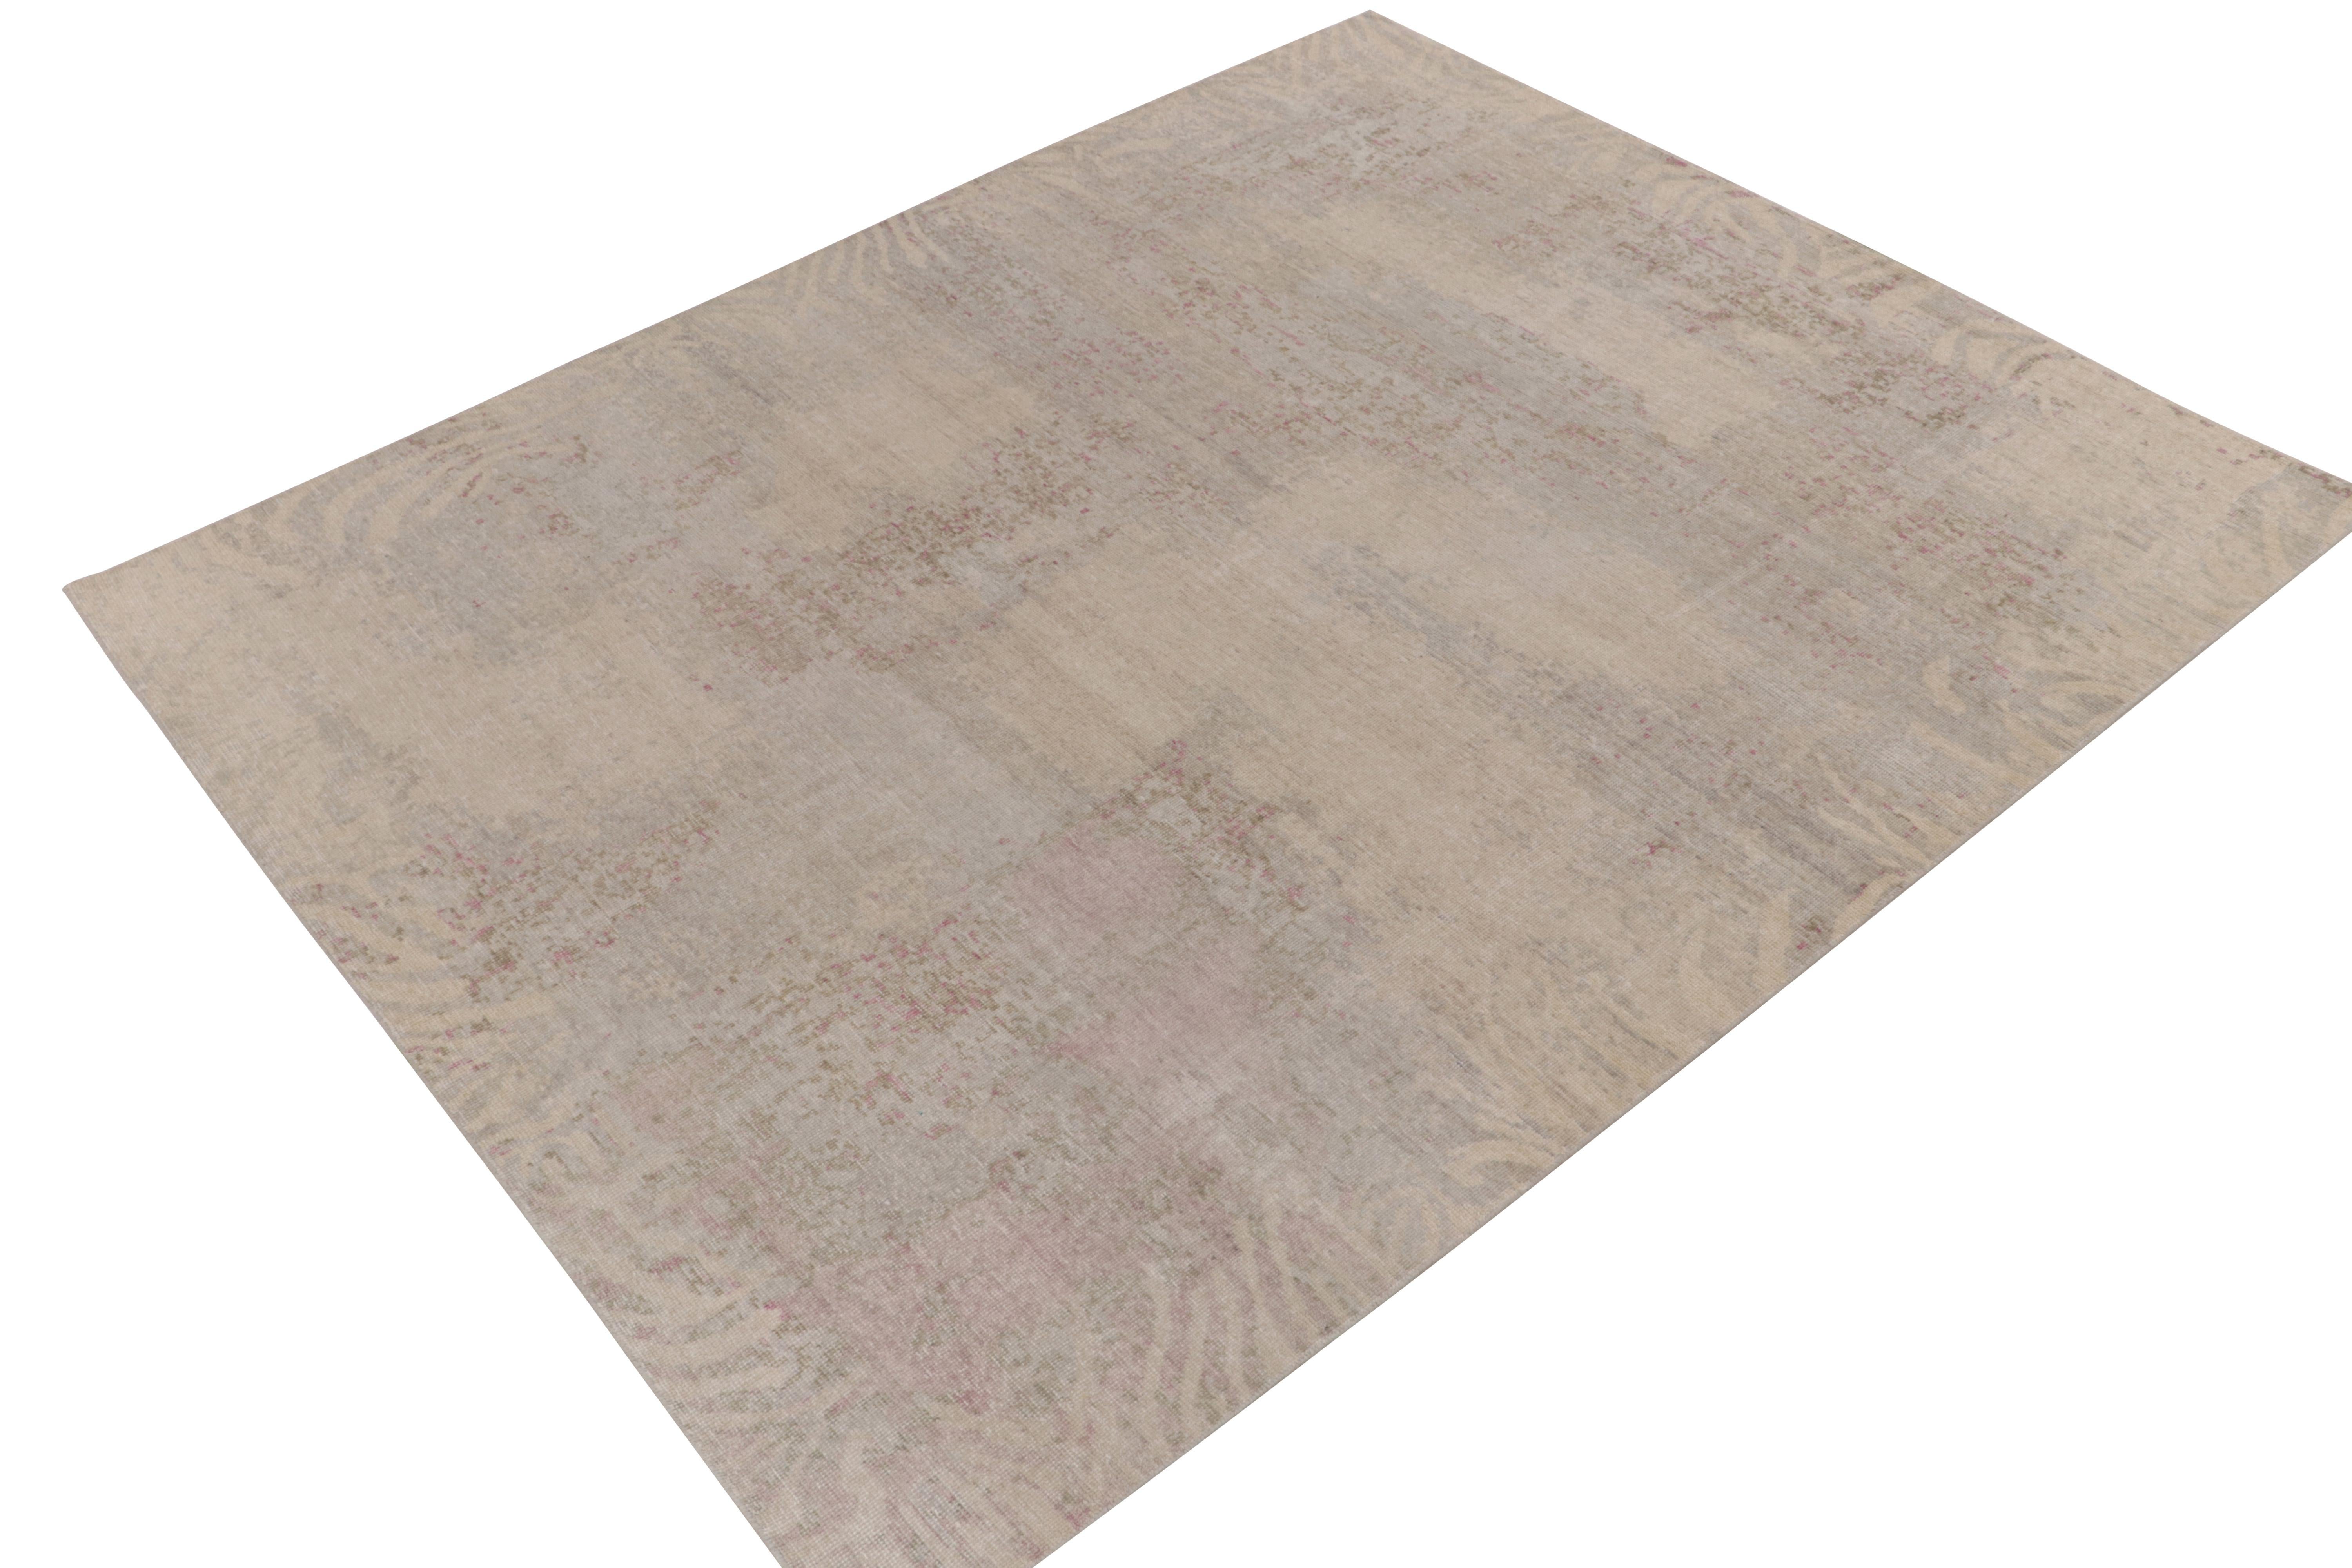 From Rug & Kilim’s Homage collection, an 8 x 10 distressed style abstract rug relishing a forgiving play of luscious beige, brown & blue for an alluring take on this textural style. Connoisseurs may note specks of rich purple for an inviting